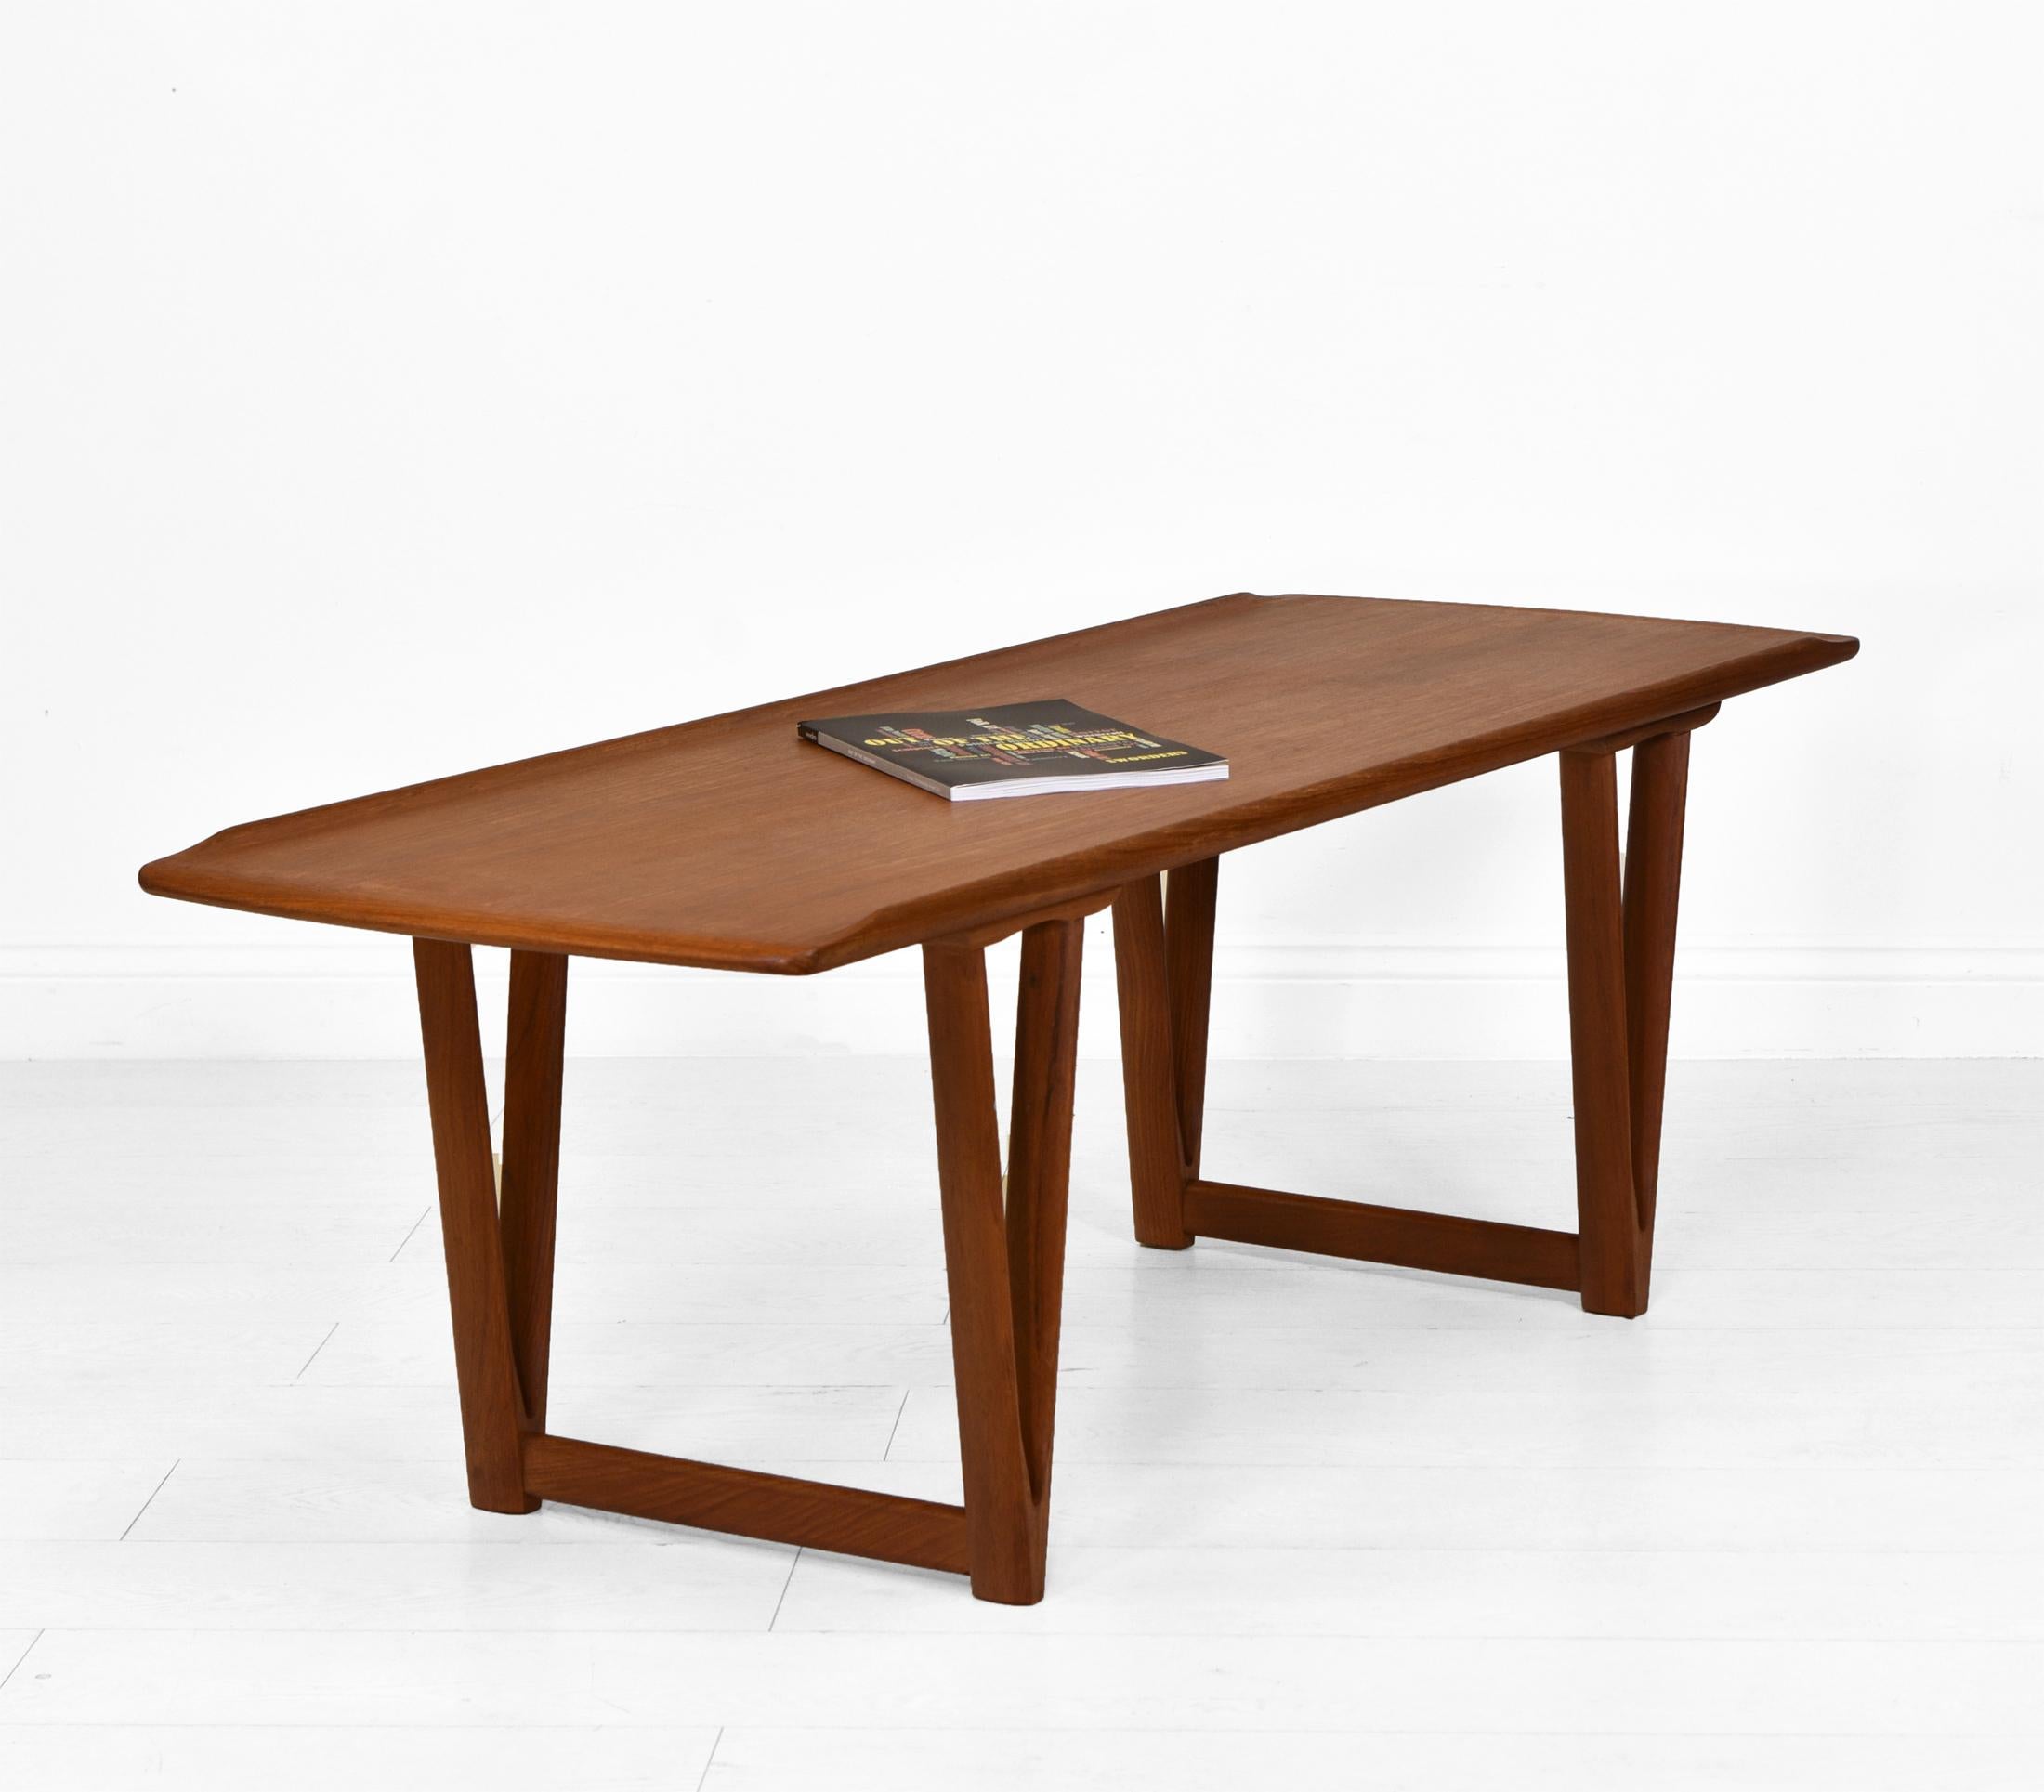 A mid century Danish teak coffee table attributed to Andreas Hansen. Circa 1960.

This stylish design table stands on V-shape supports and has a lipped top edge.

It is in very good condition for its age, the top has a matt finish and there are